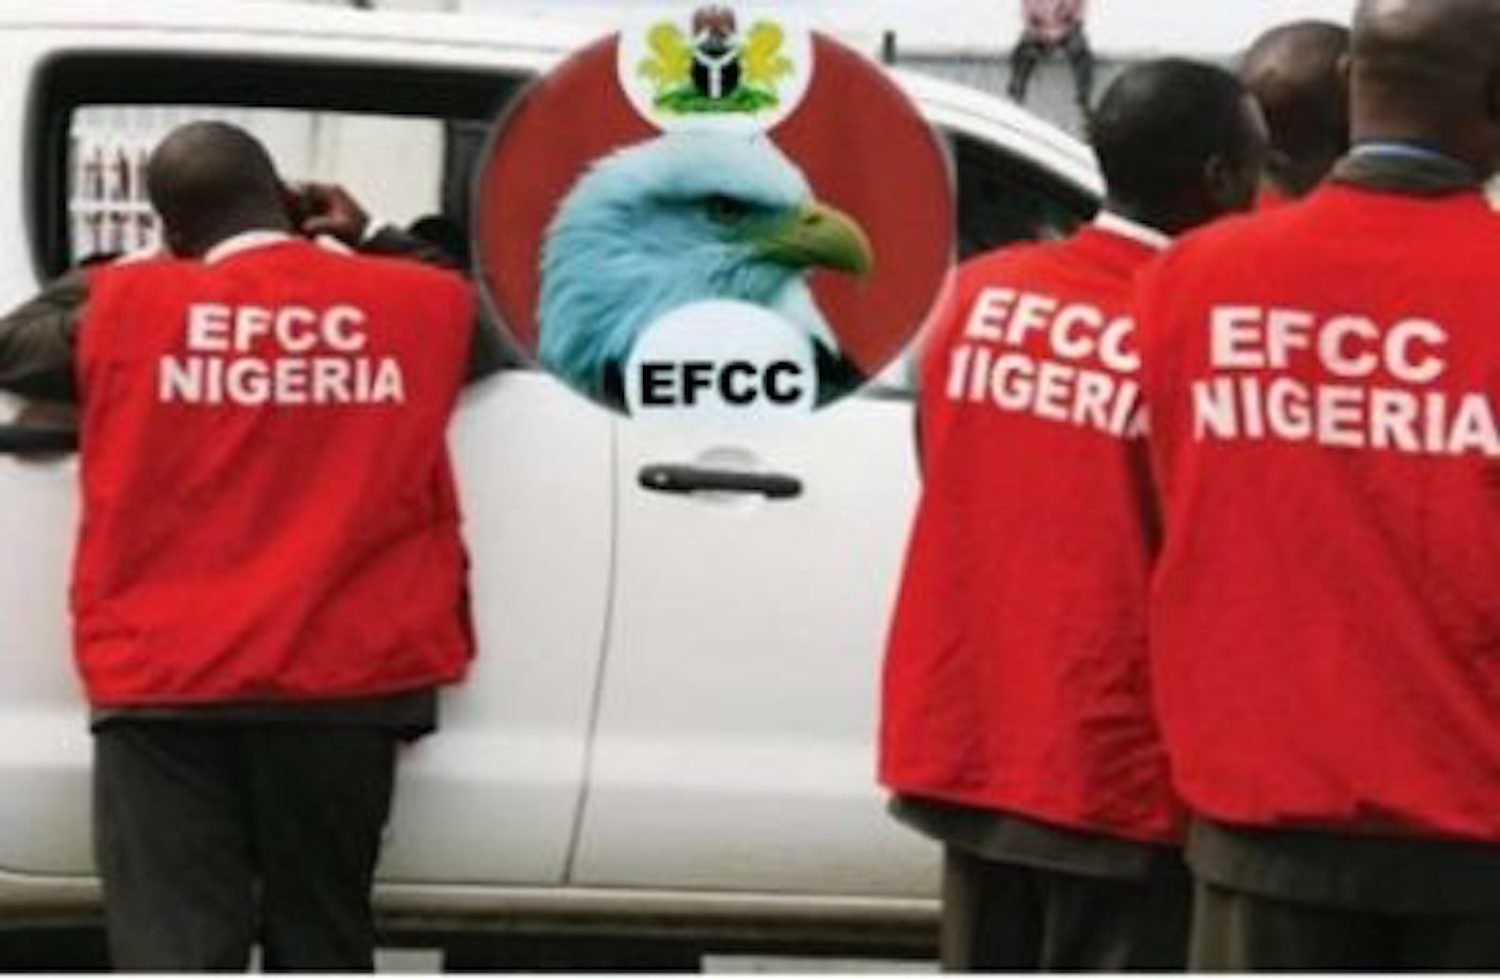 Details On EFCC's Raiding Of Justice Odili's Home